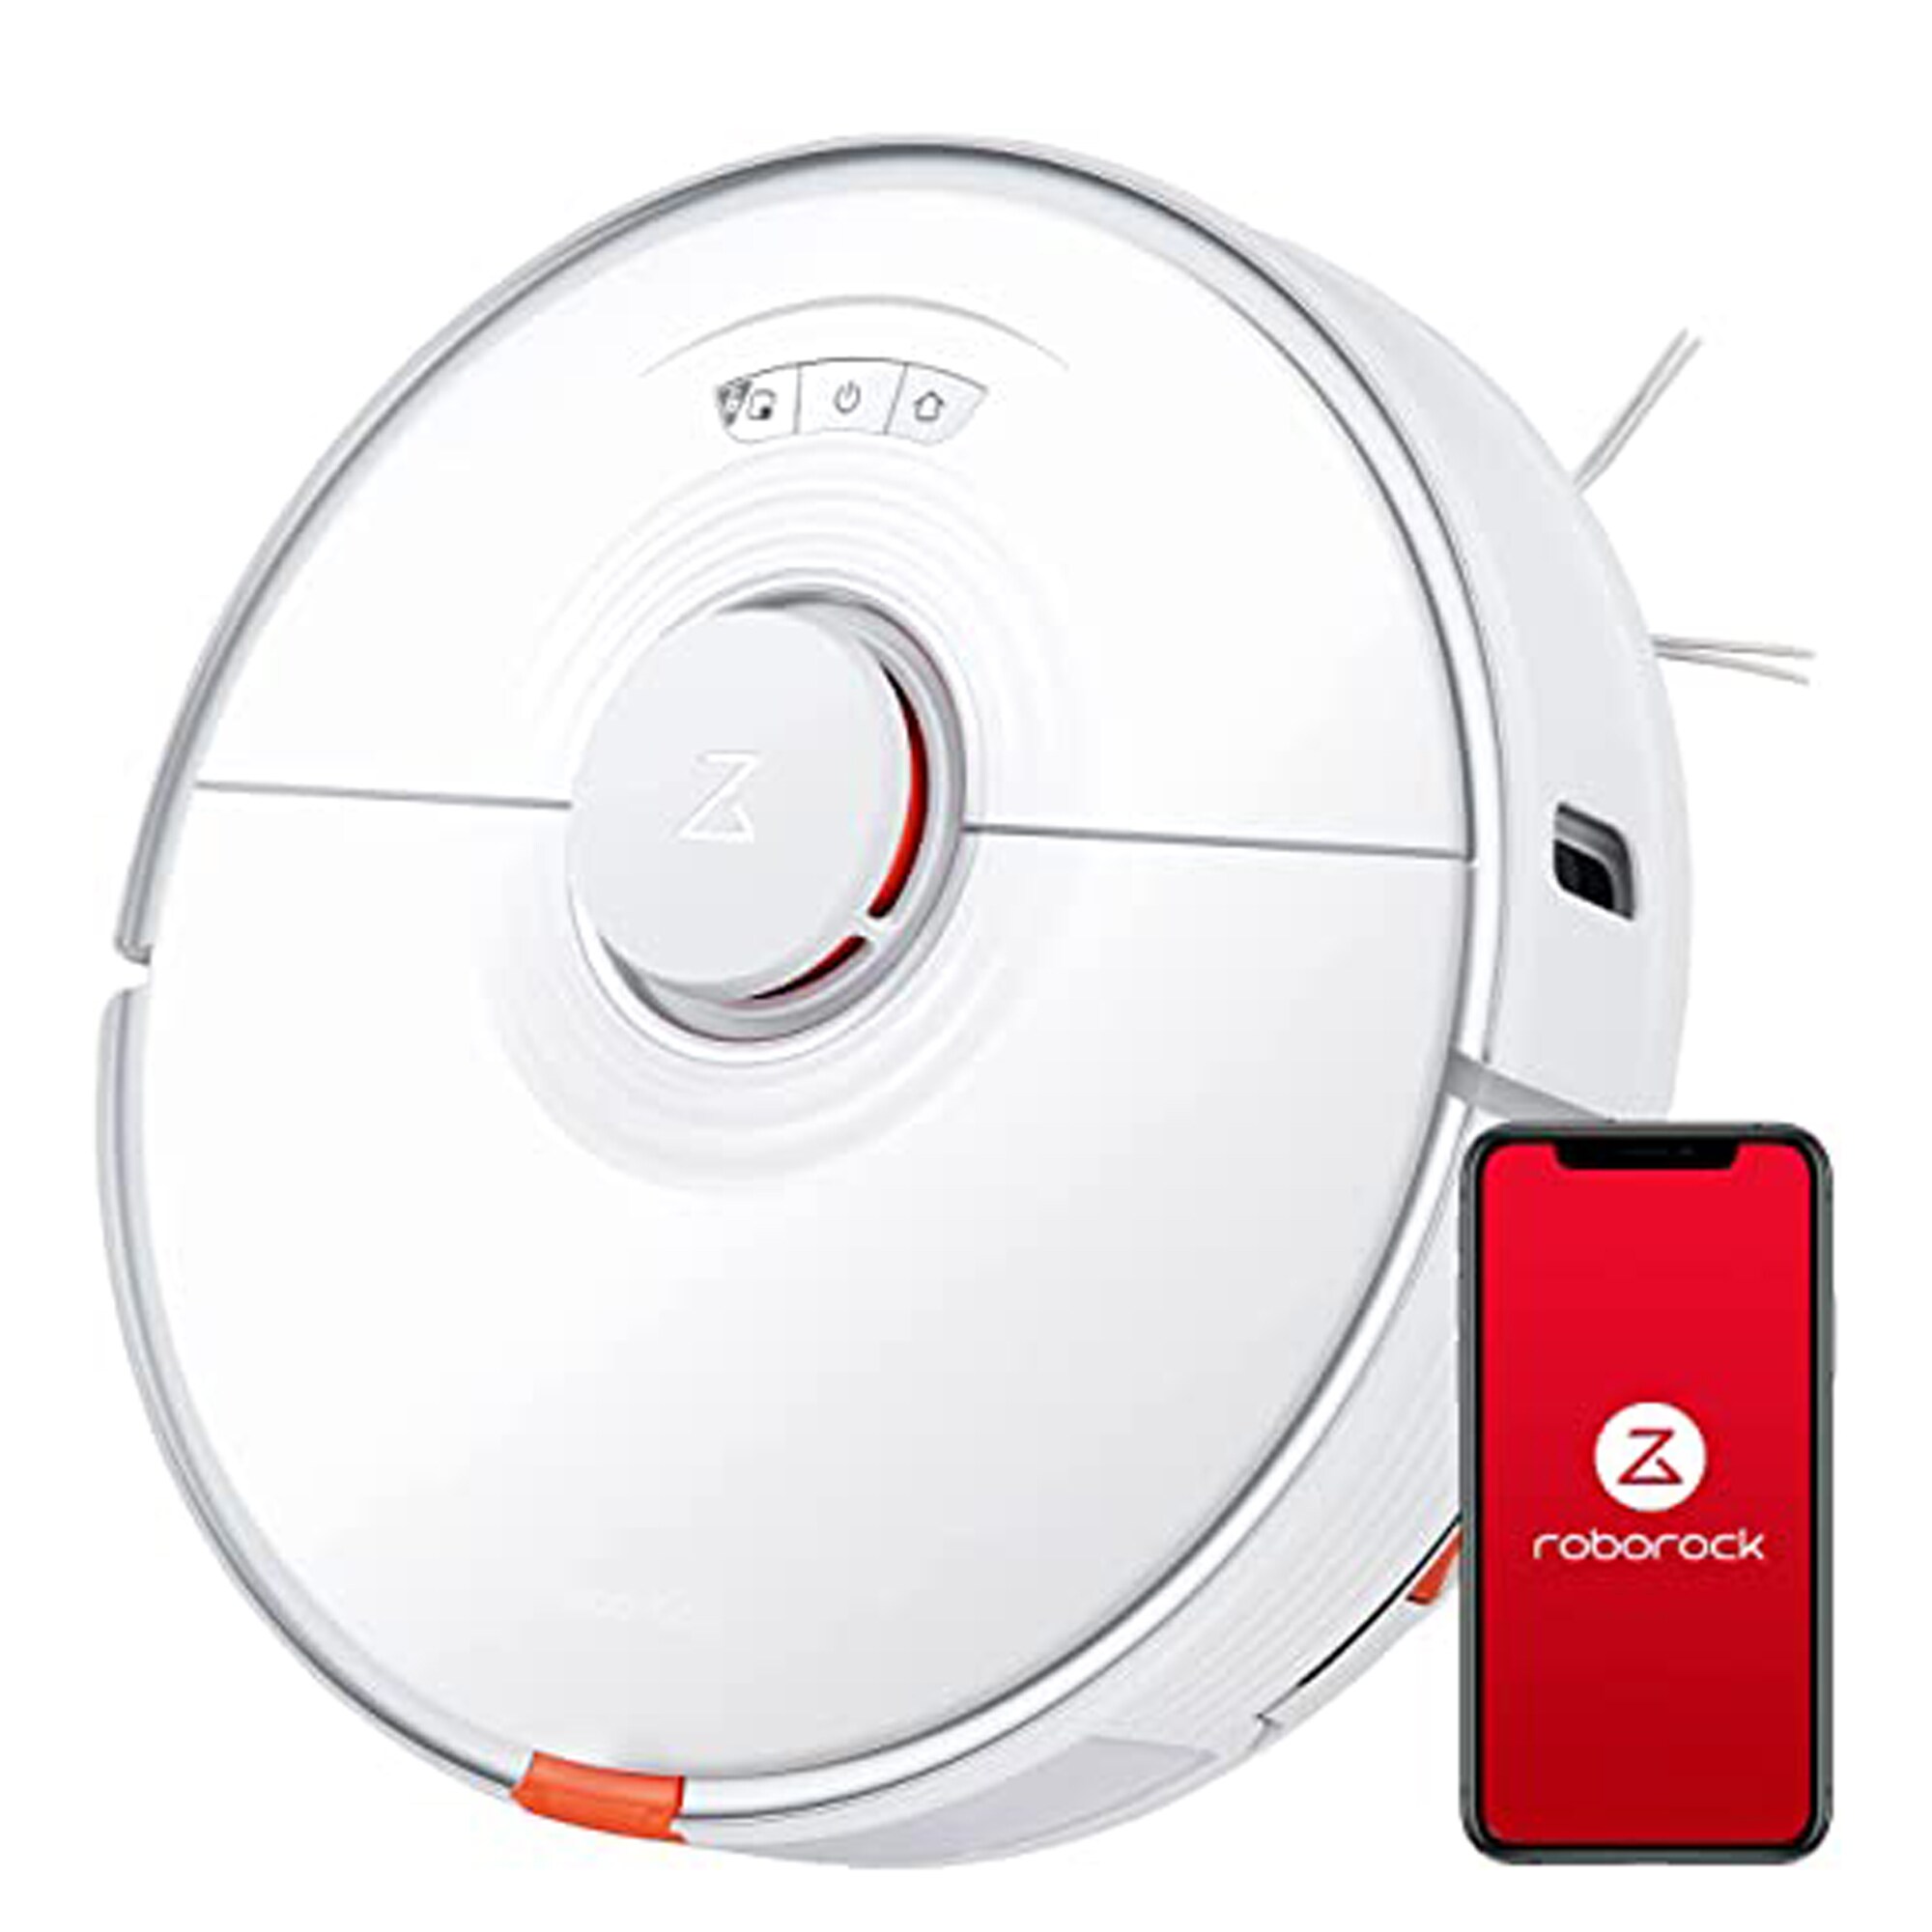 Reviews for Roborock Q Revo Robotic Vacuum and Mop with Smart Navigation,  Self-Emptying, Self-Drying, Multisurface in White